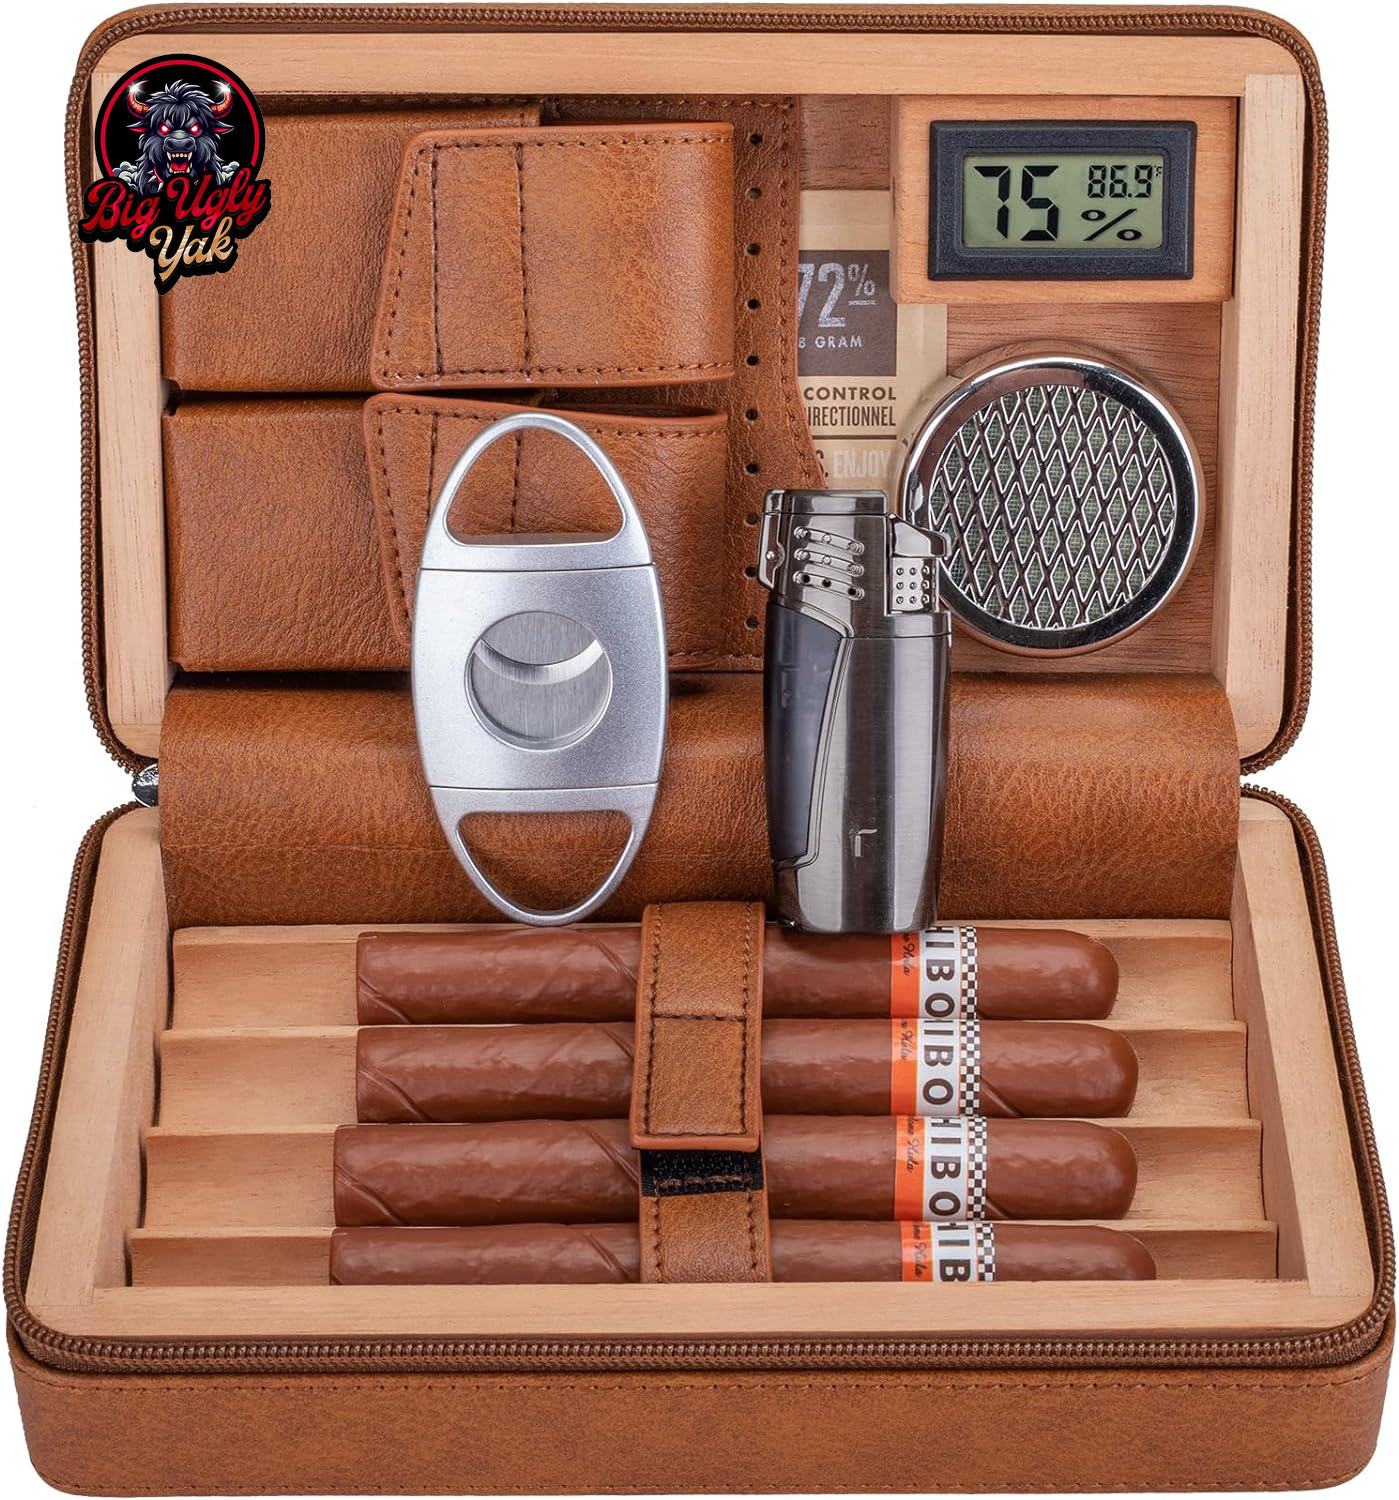 Premium Handmade Leather Cigar Travel Humidor Set – Complete with Cigar Lighter,